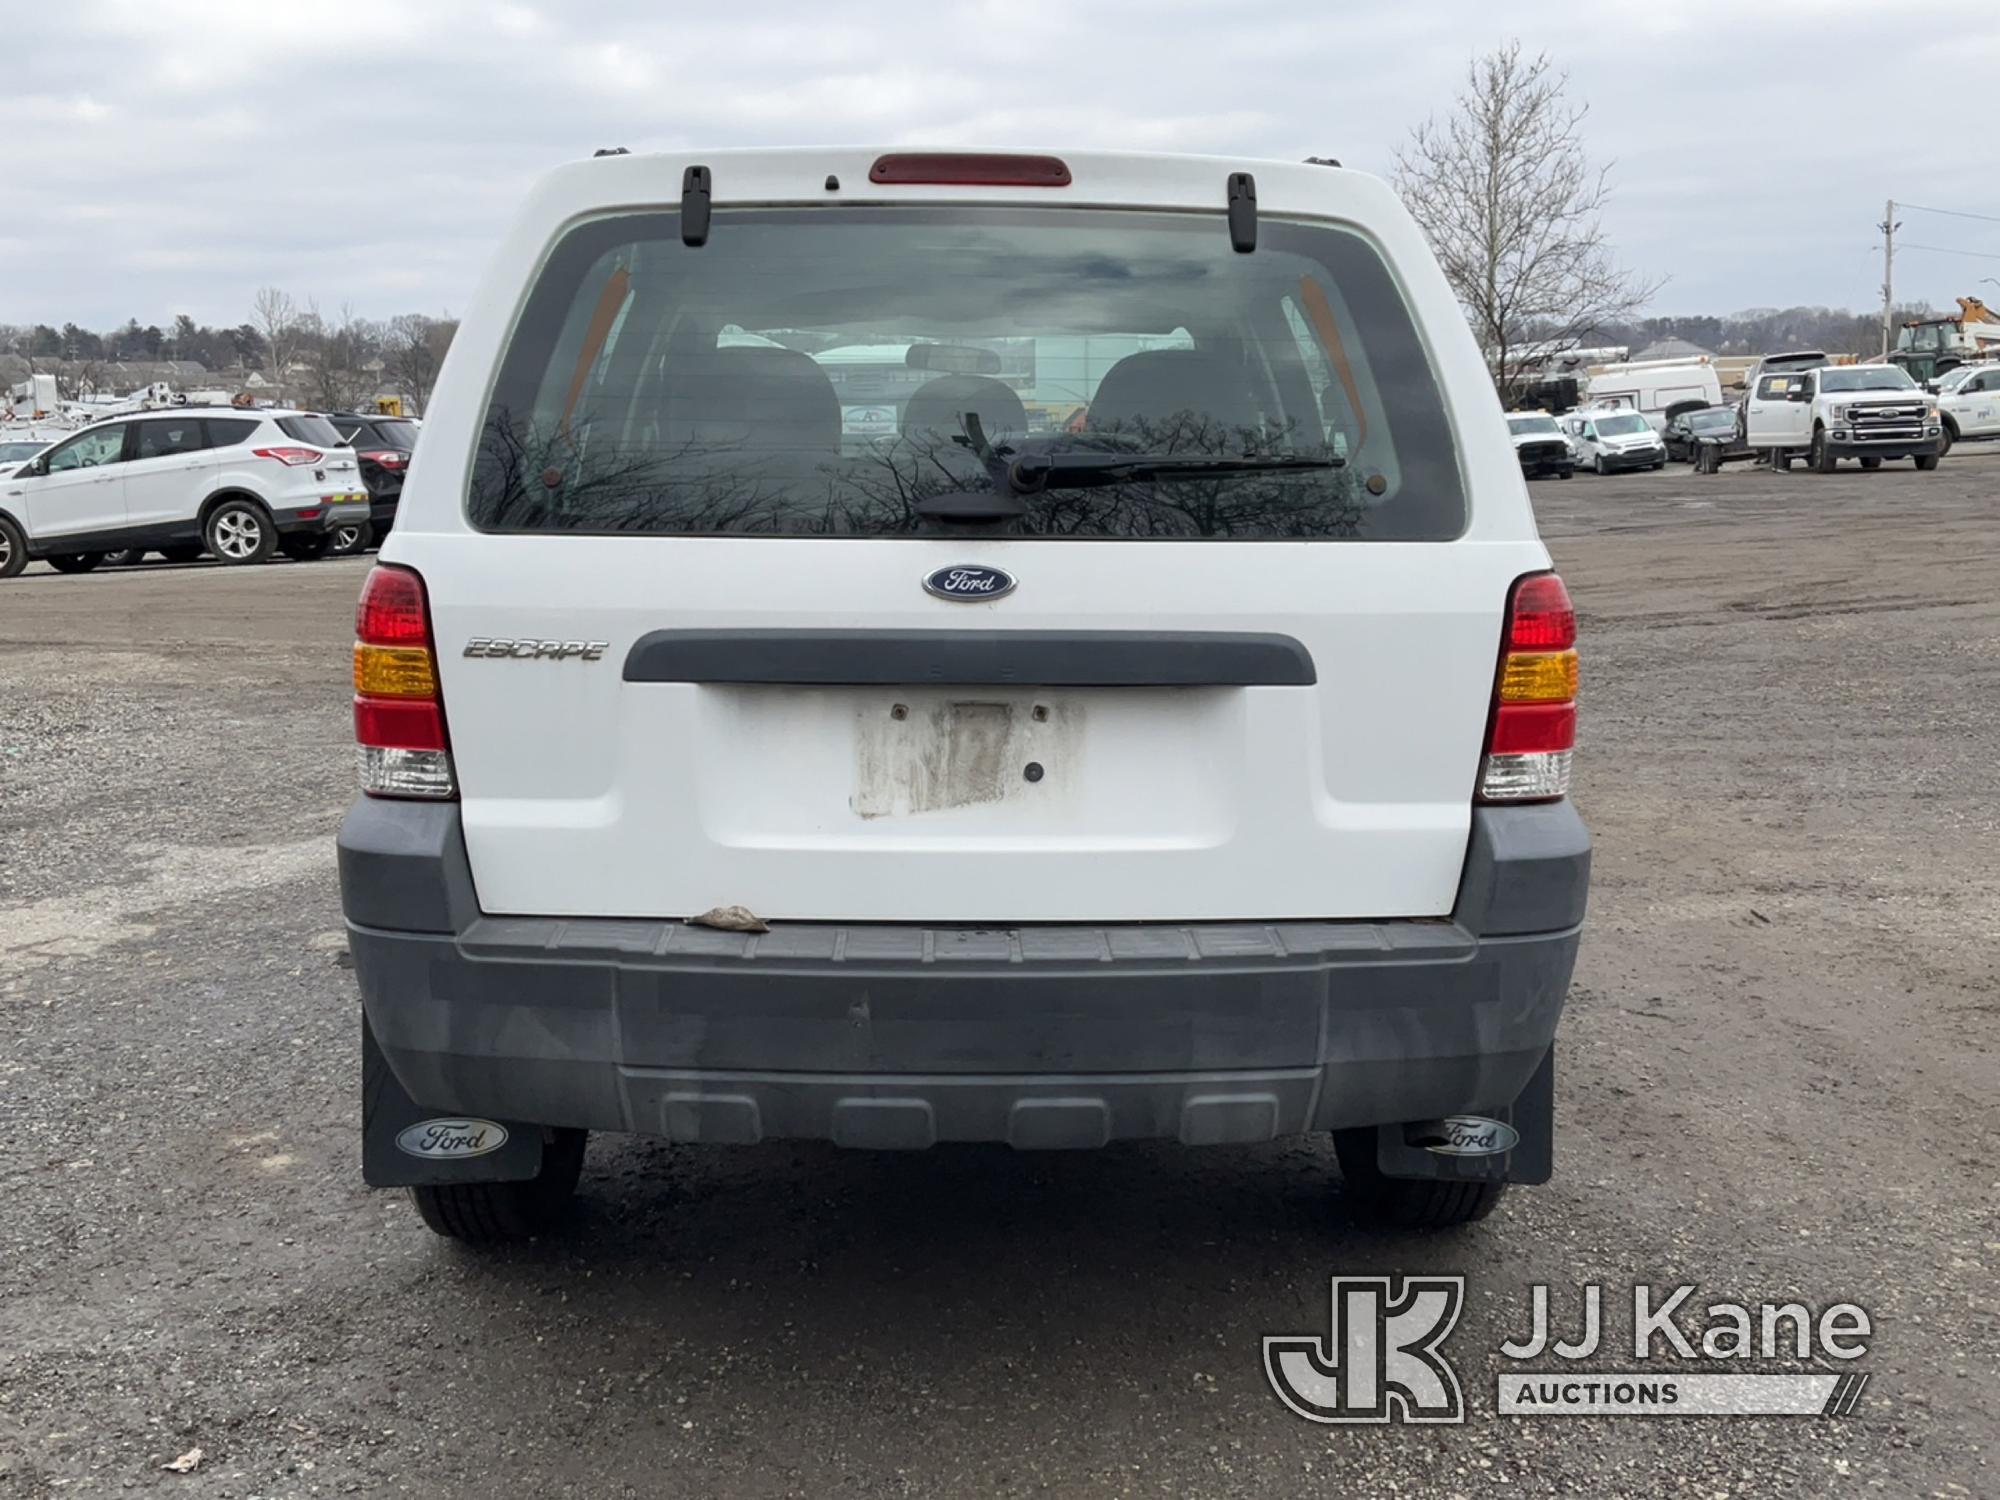 (Plymouth Meeting, PA) 2006 Ford Escape 4x4 4-Door Sport Utility Vehicle Runs & Moves, Body & Rust D